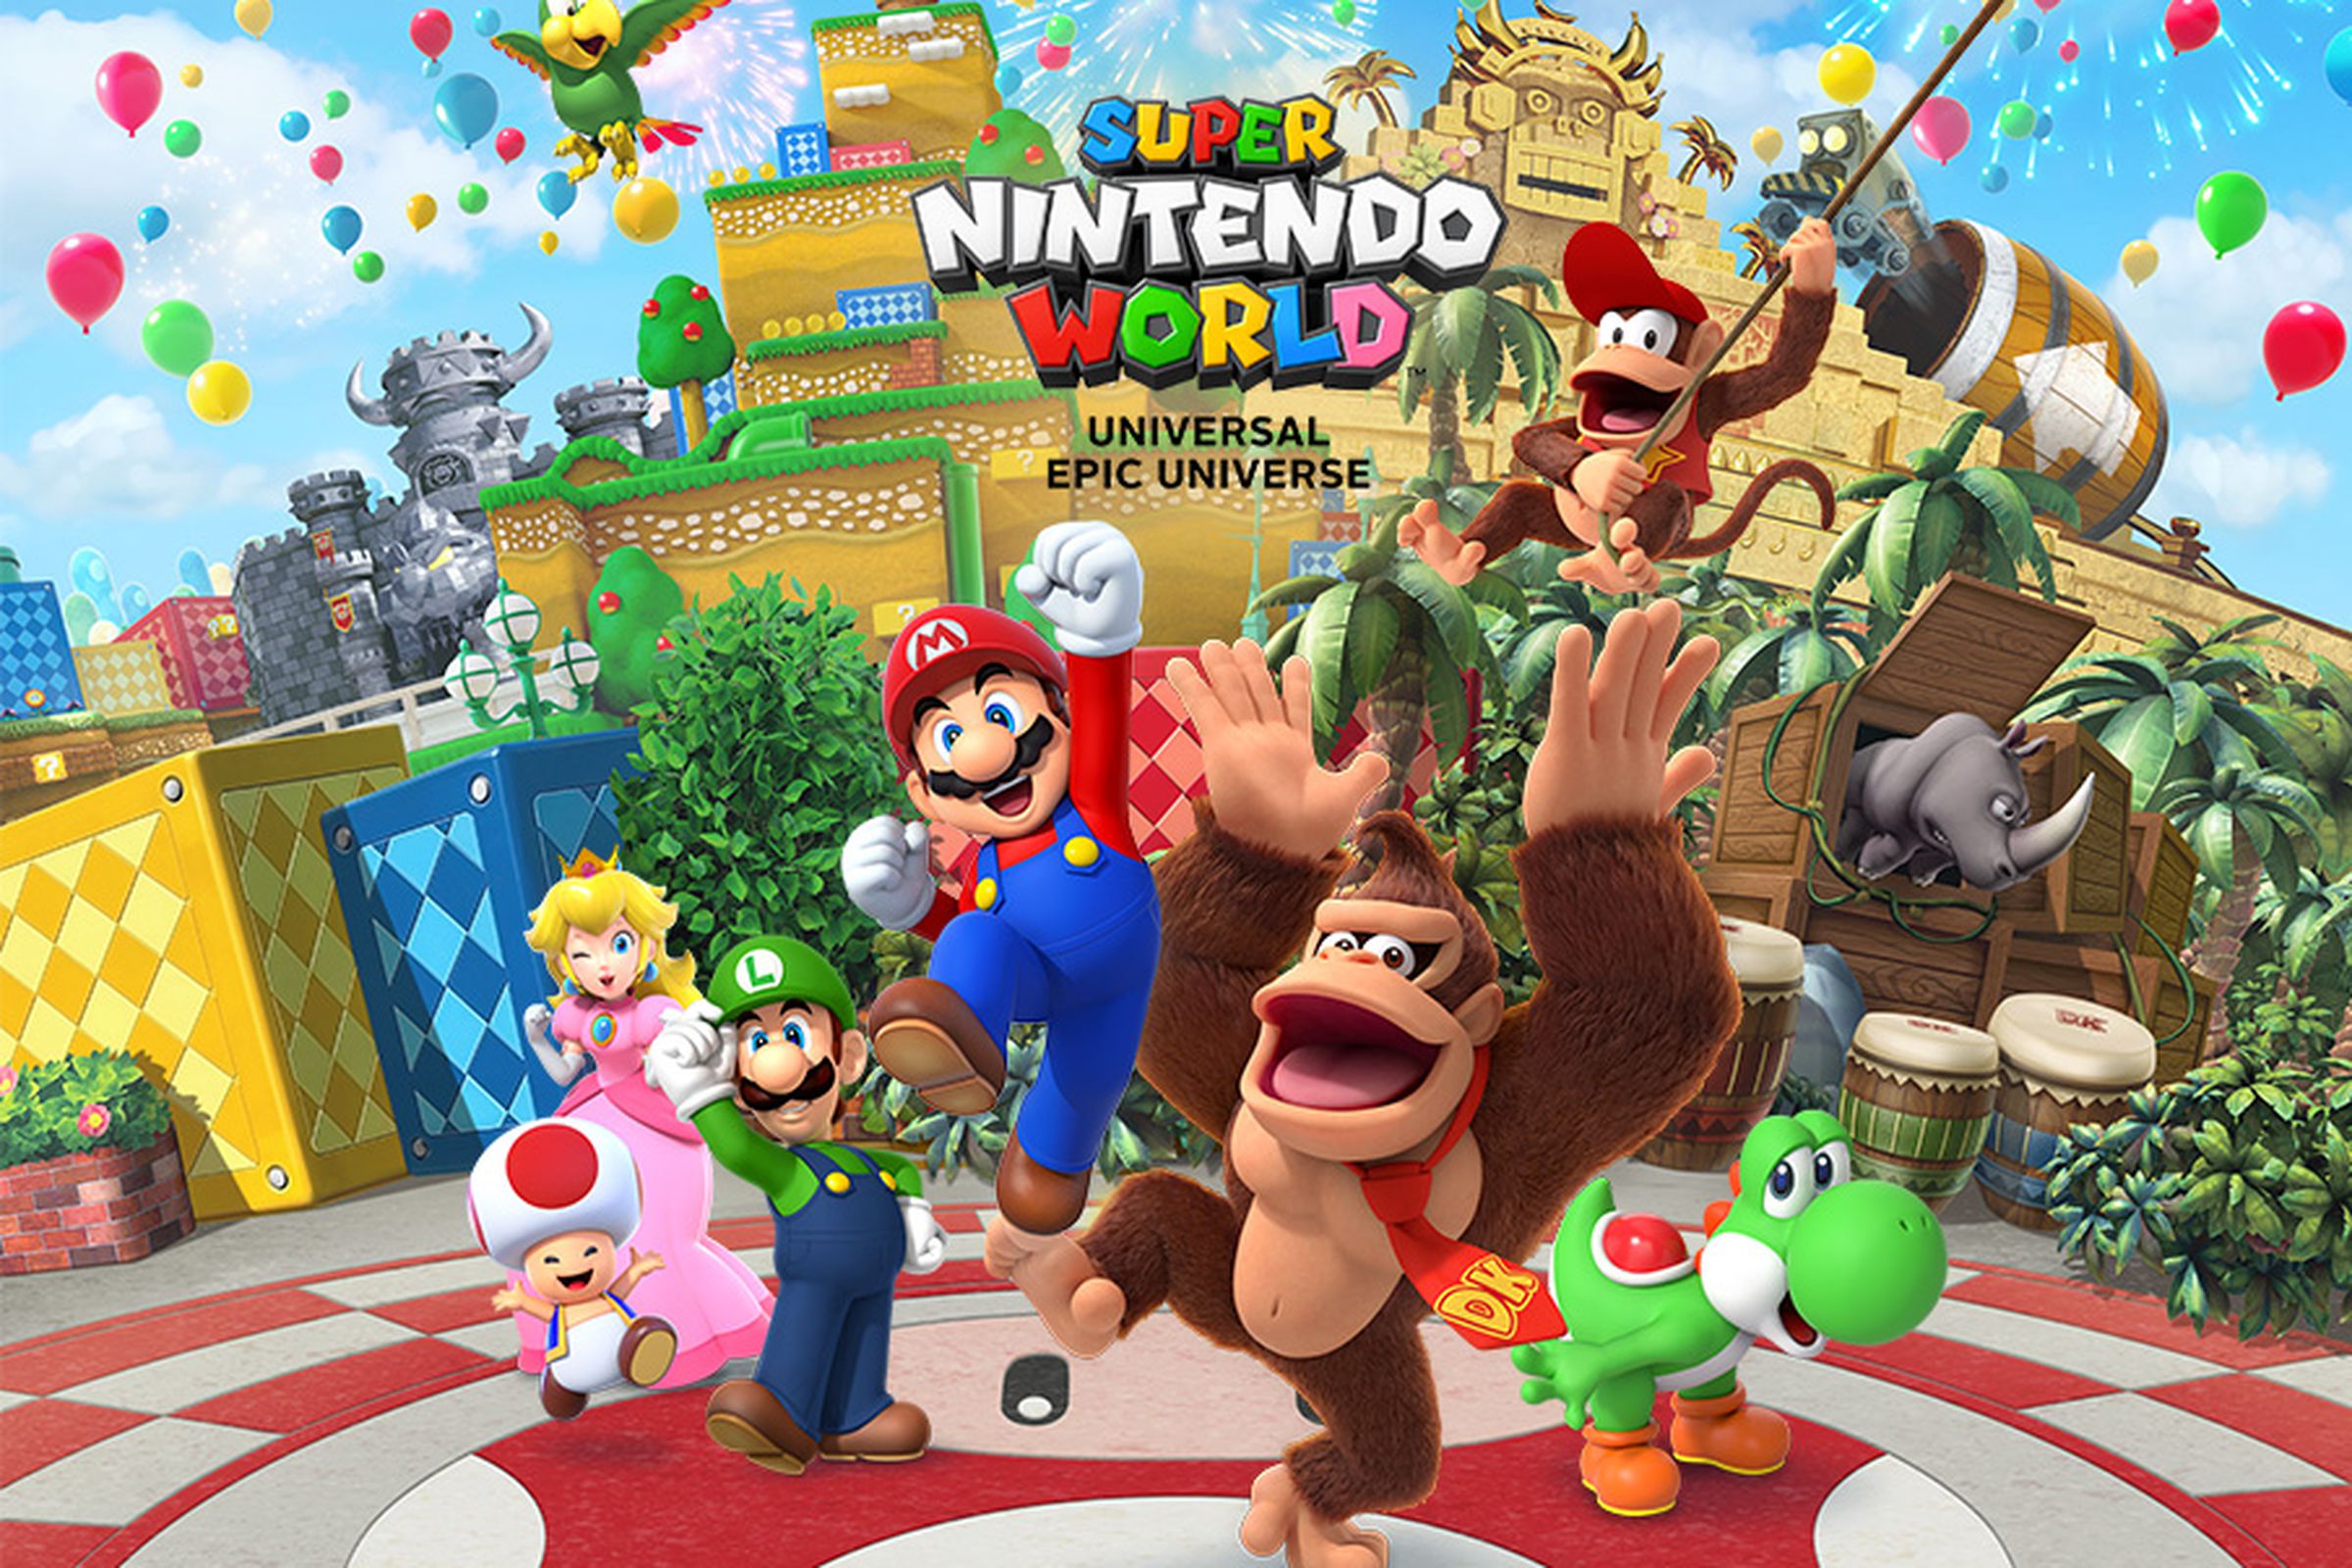 An assortment of Nintendo characters celebrating outside a mockup of Universal’s new Super Nintendo World park.